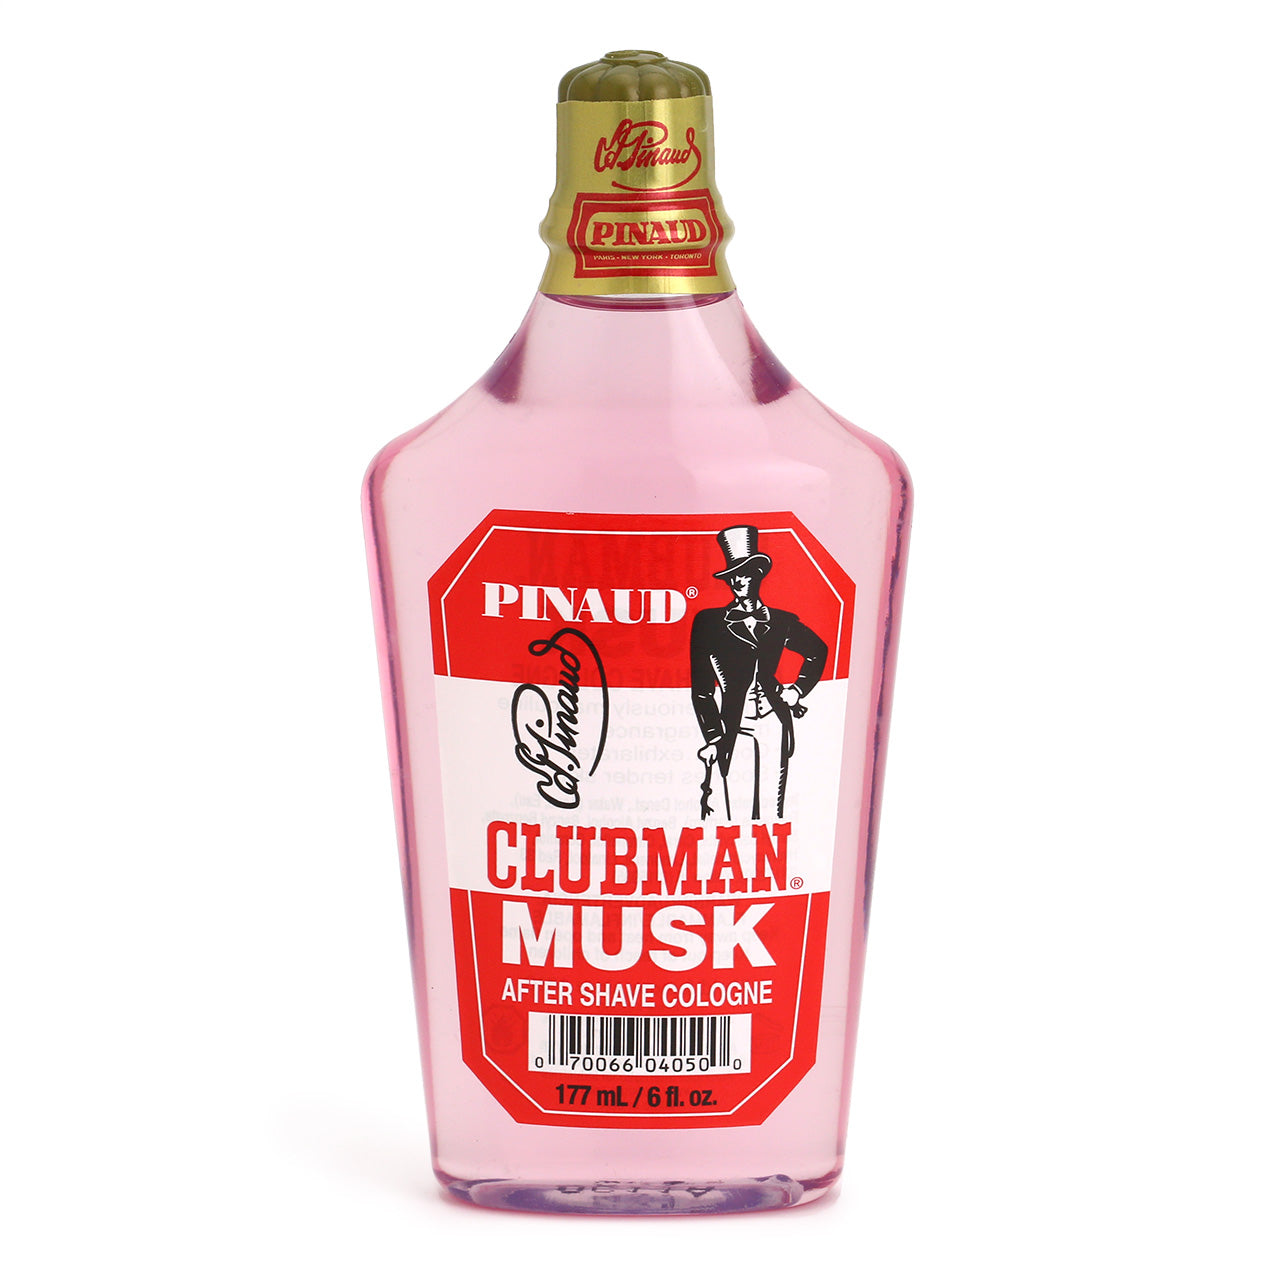 Pinaud Clubman Musk has a red label on a retro bottle